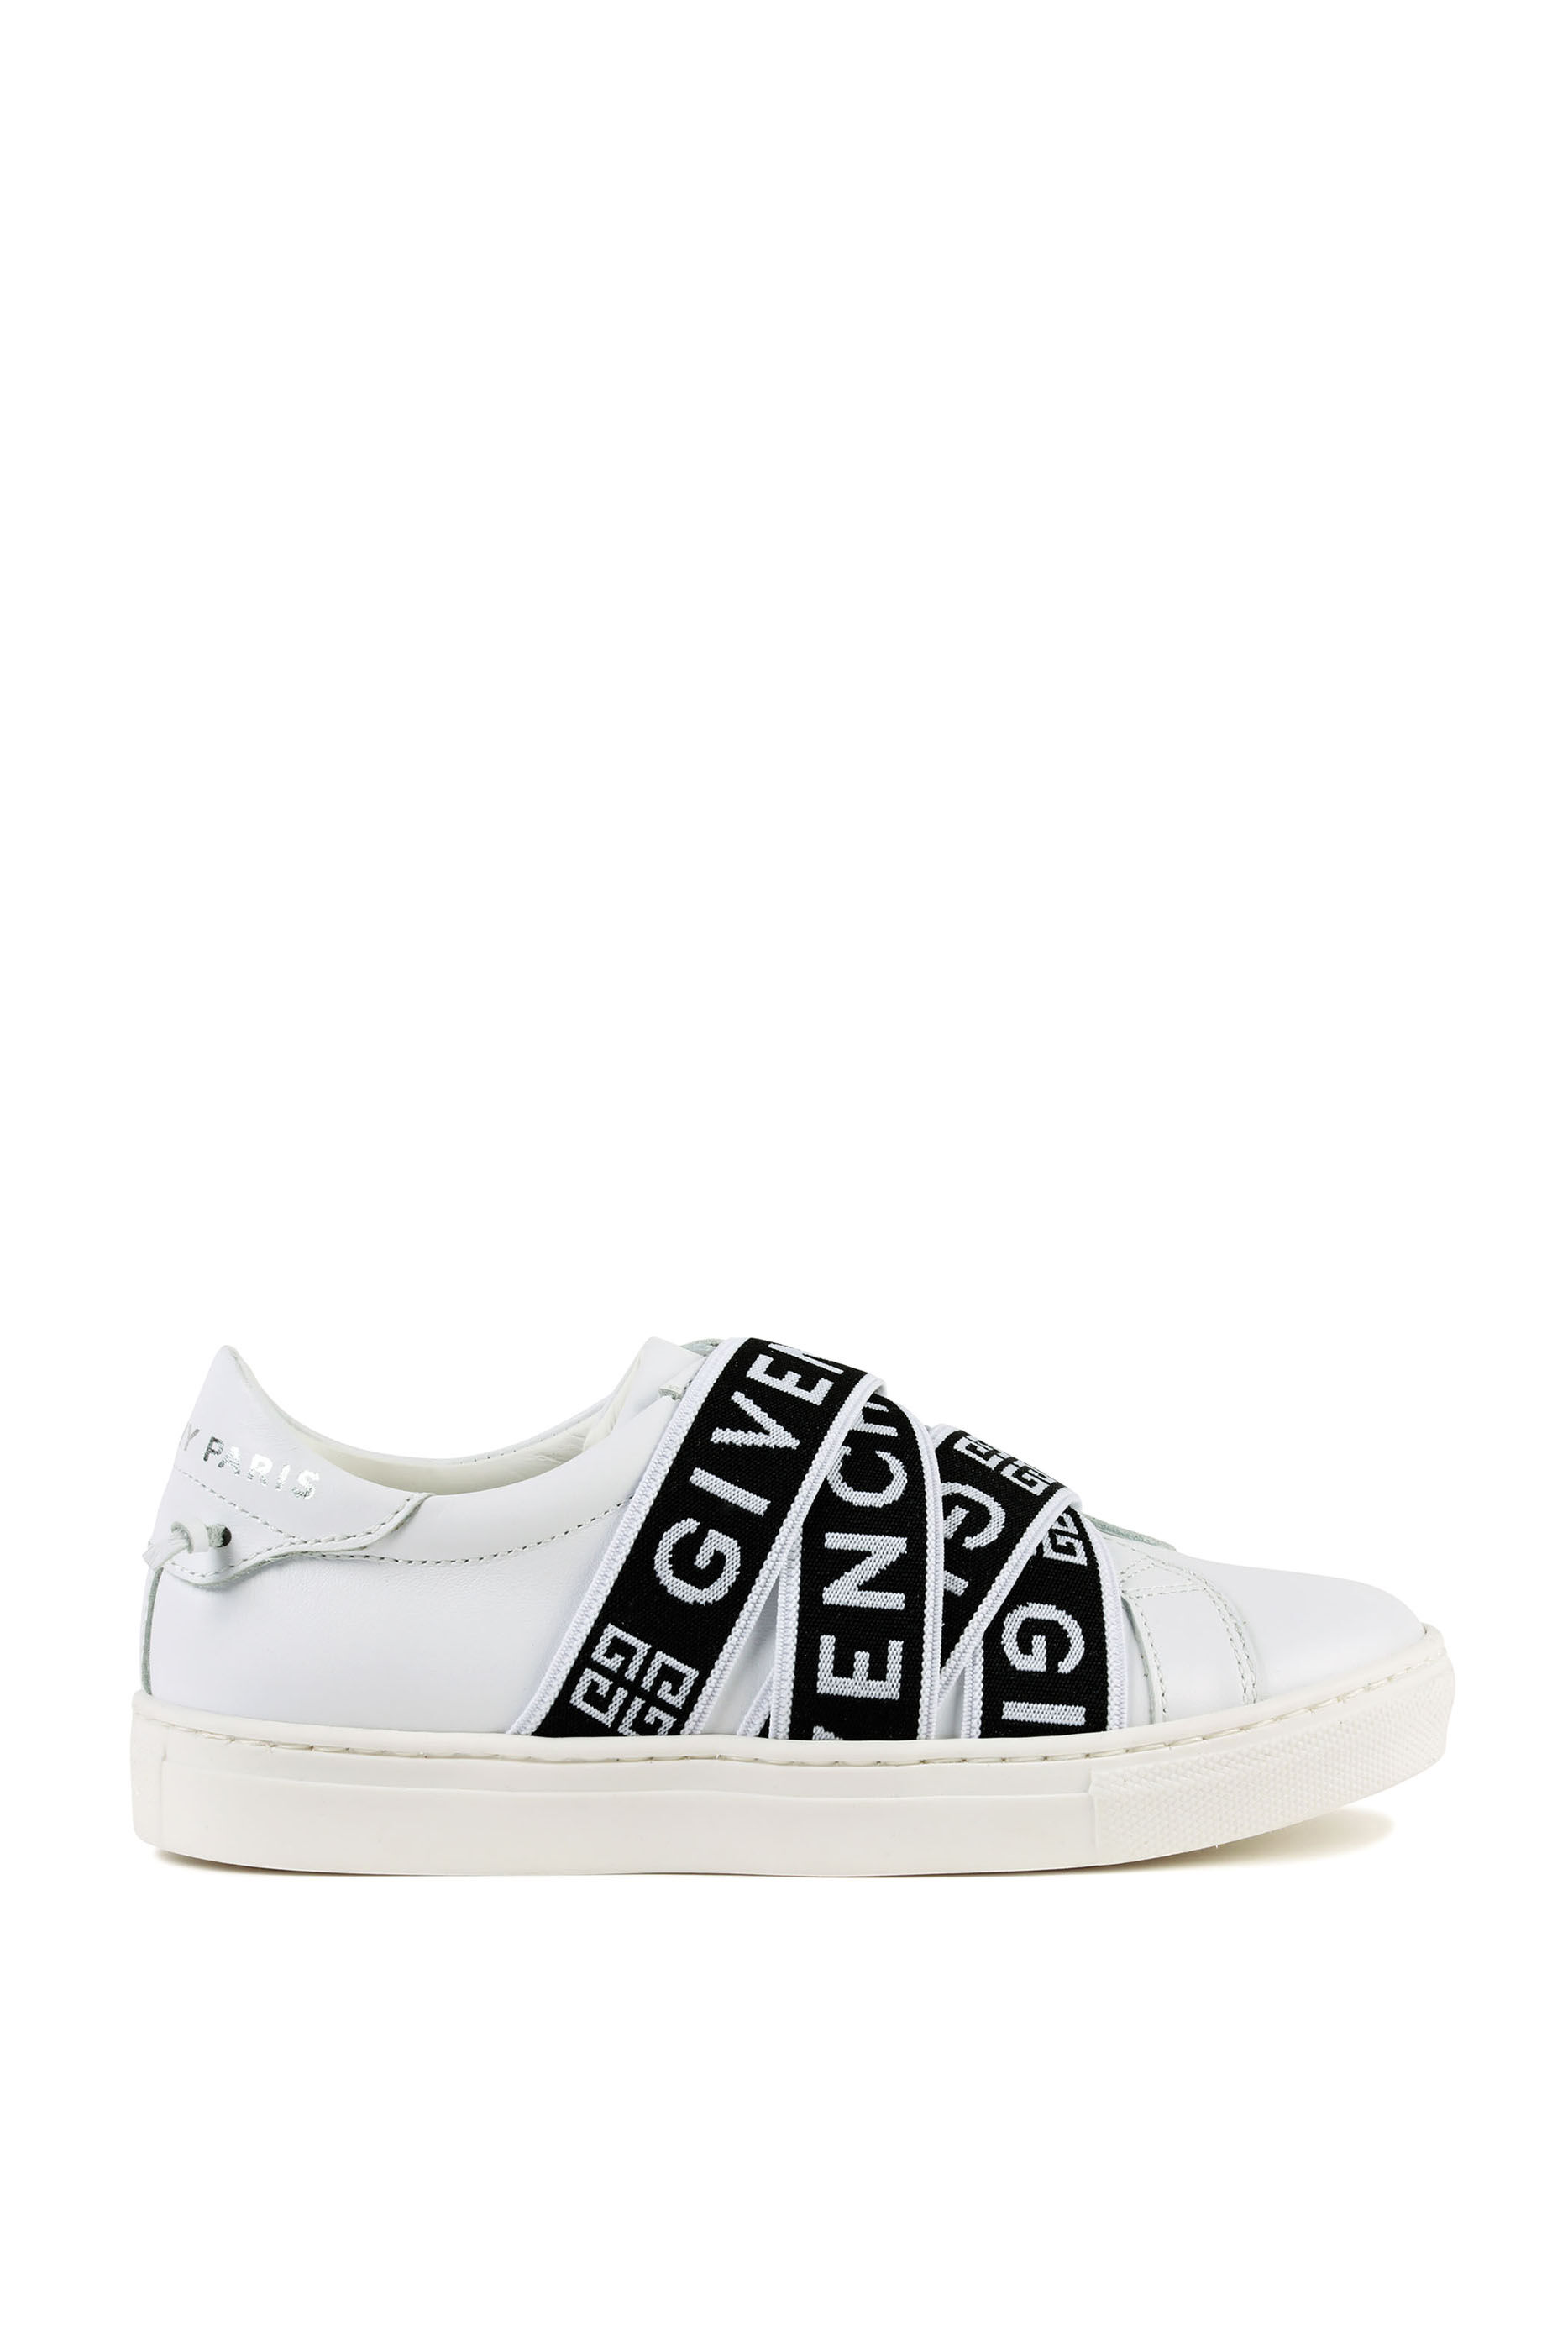 Buy Givenchy Logo Band Sneakers - Kids 